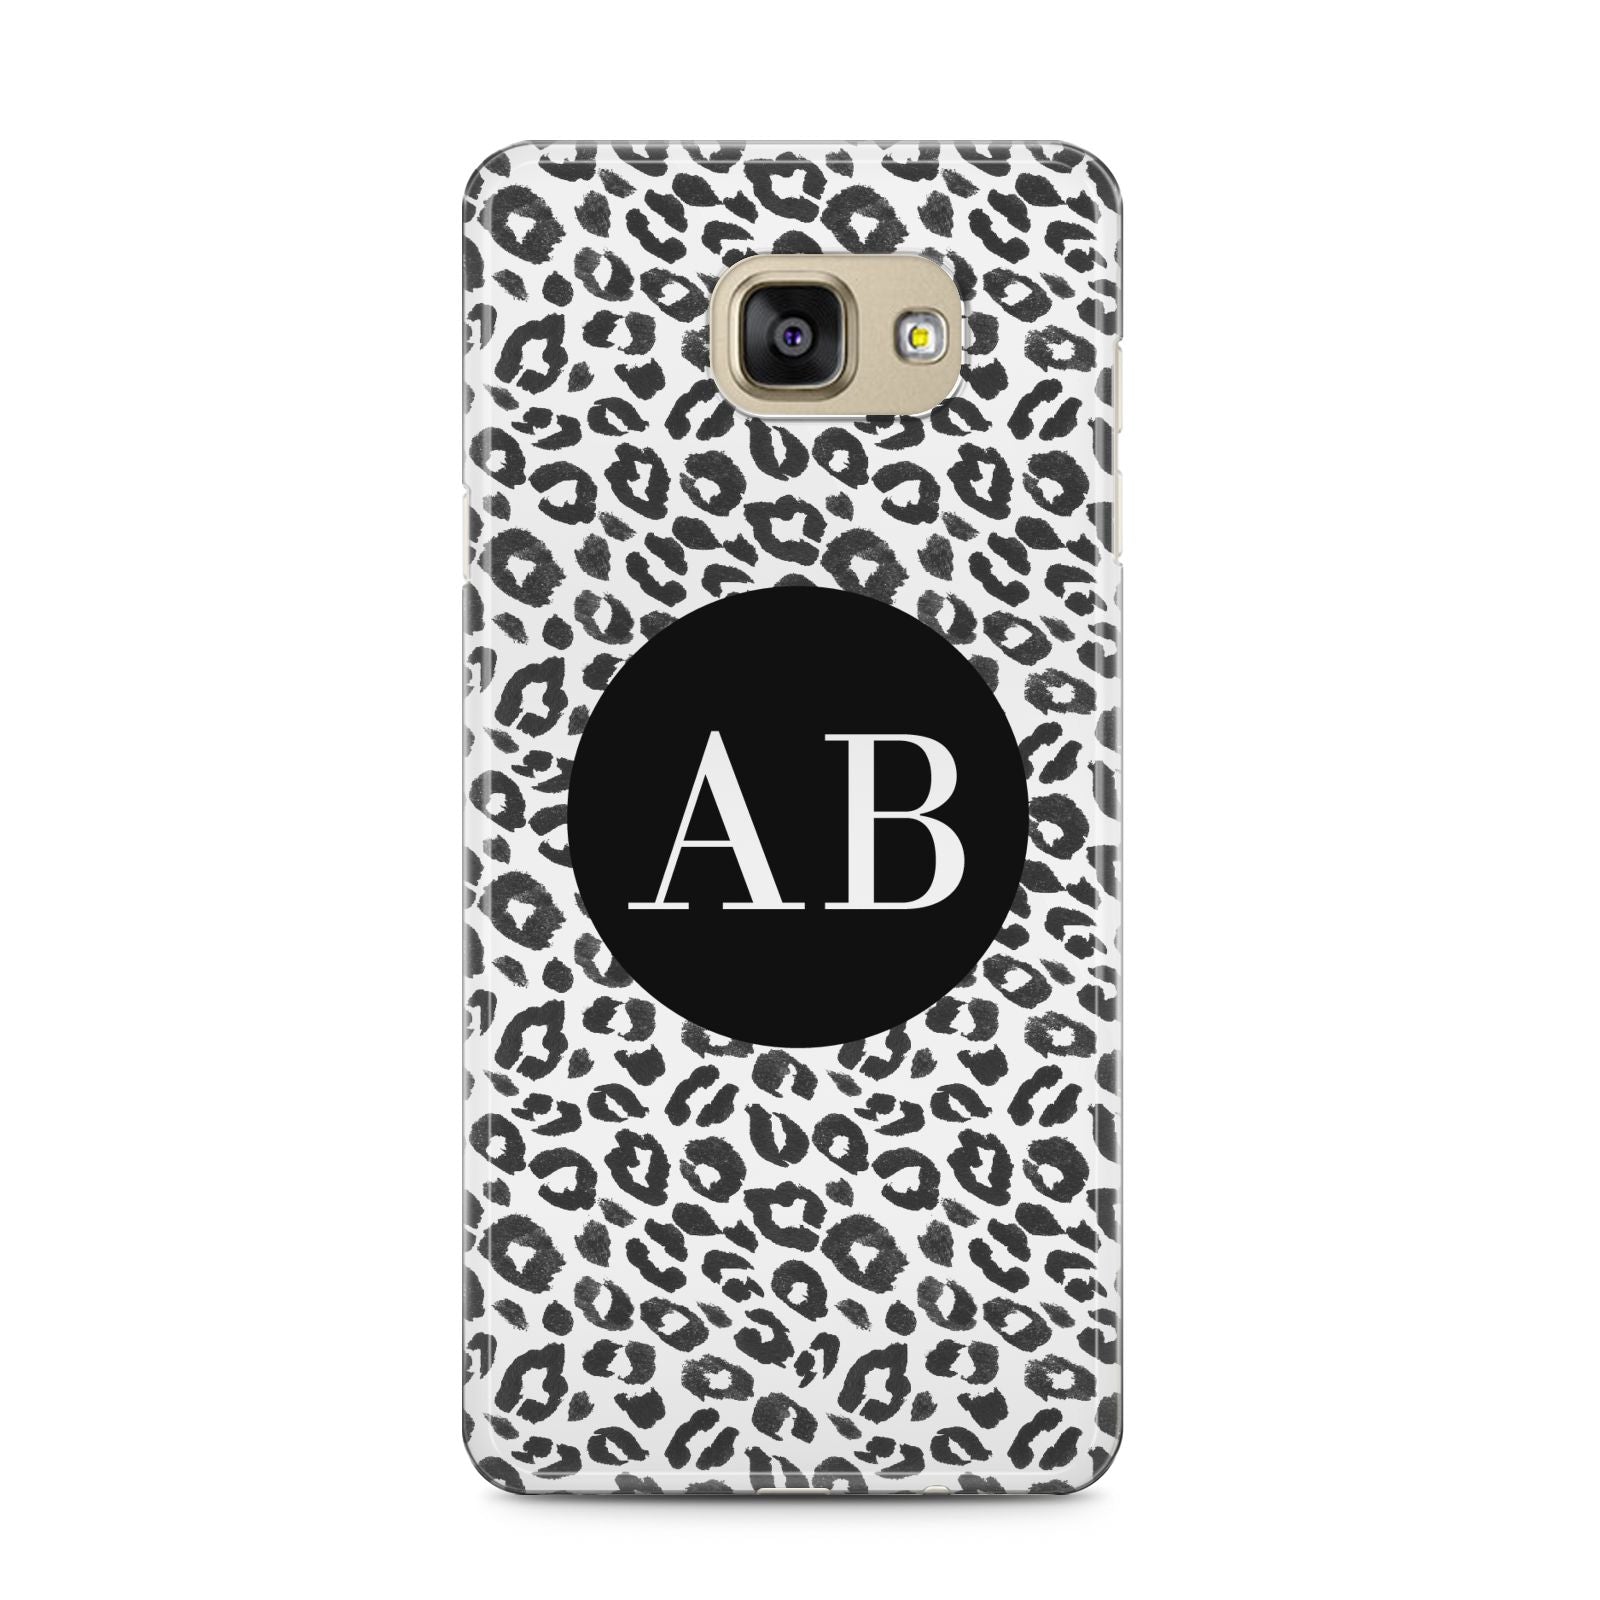 Leopard Print Black and White Samsung Galaxy A5 2016 Case on gold phone